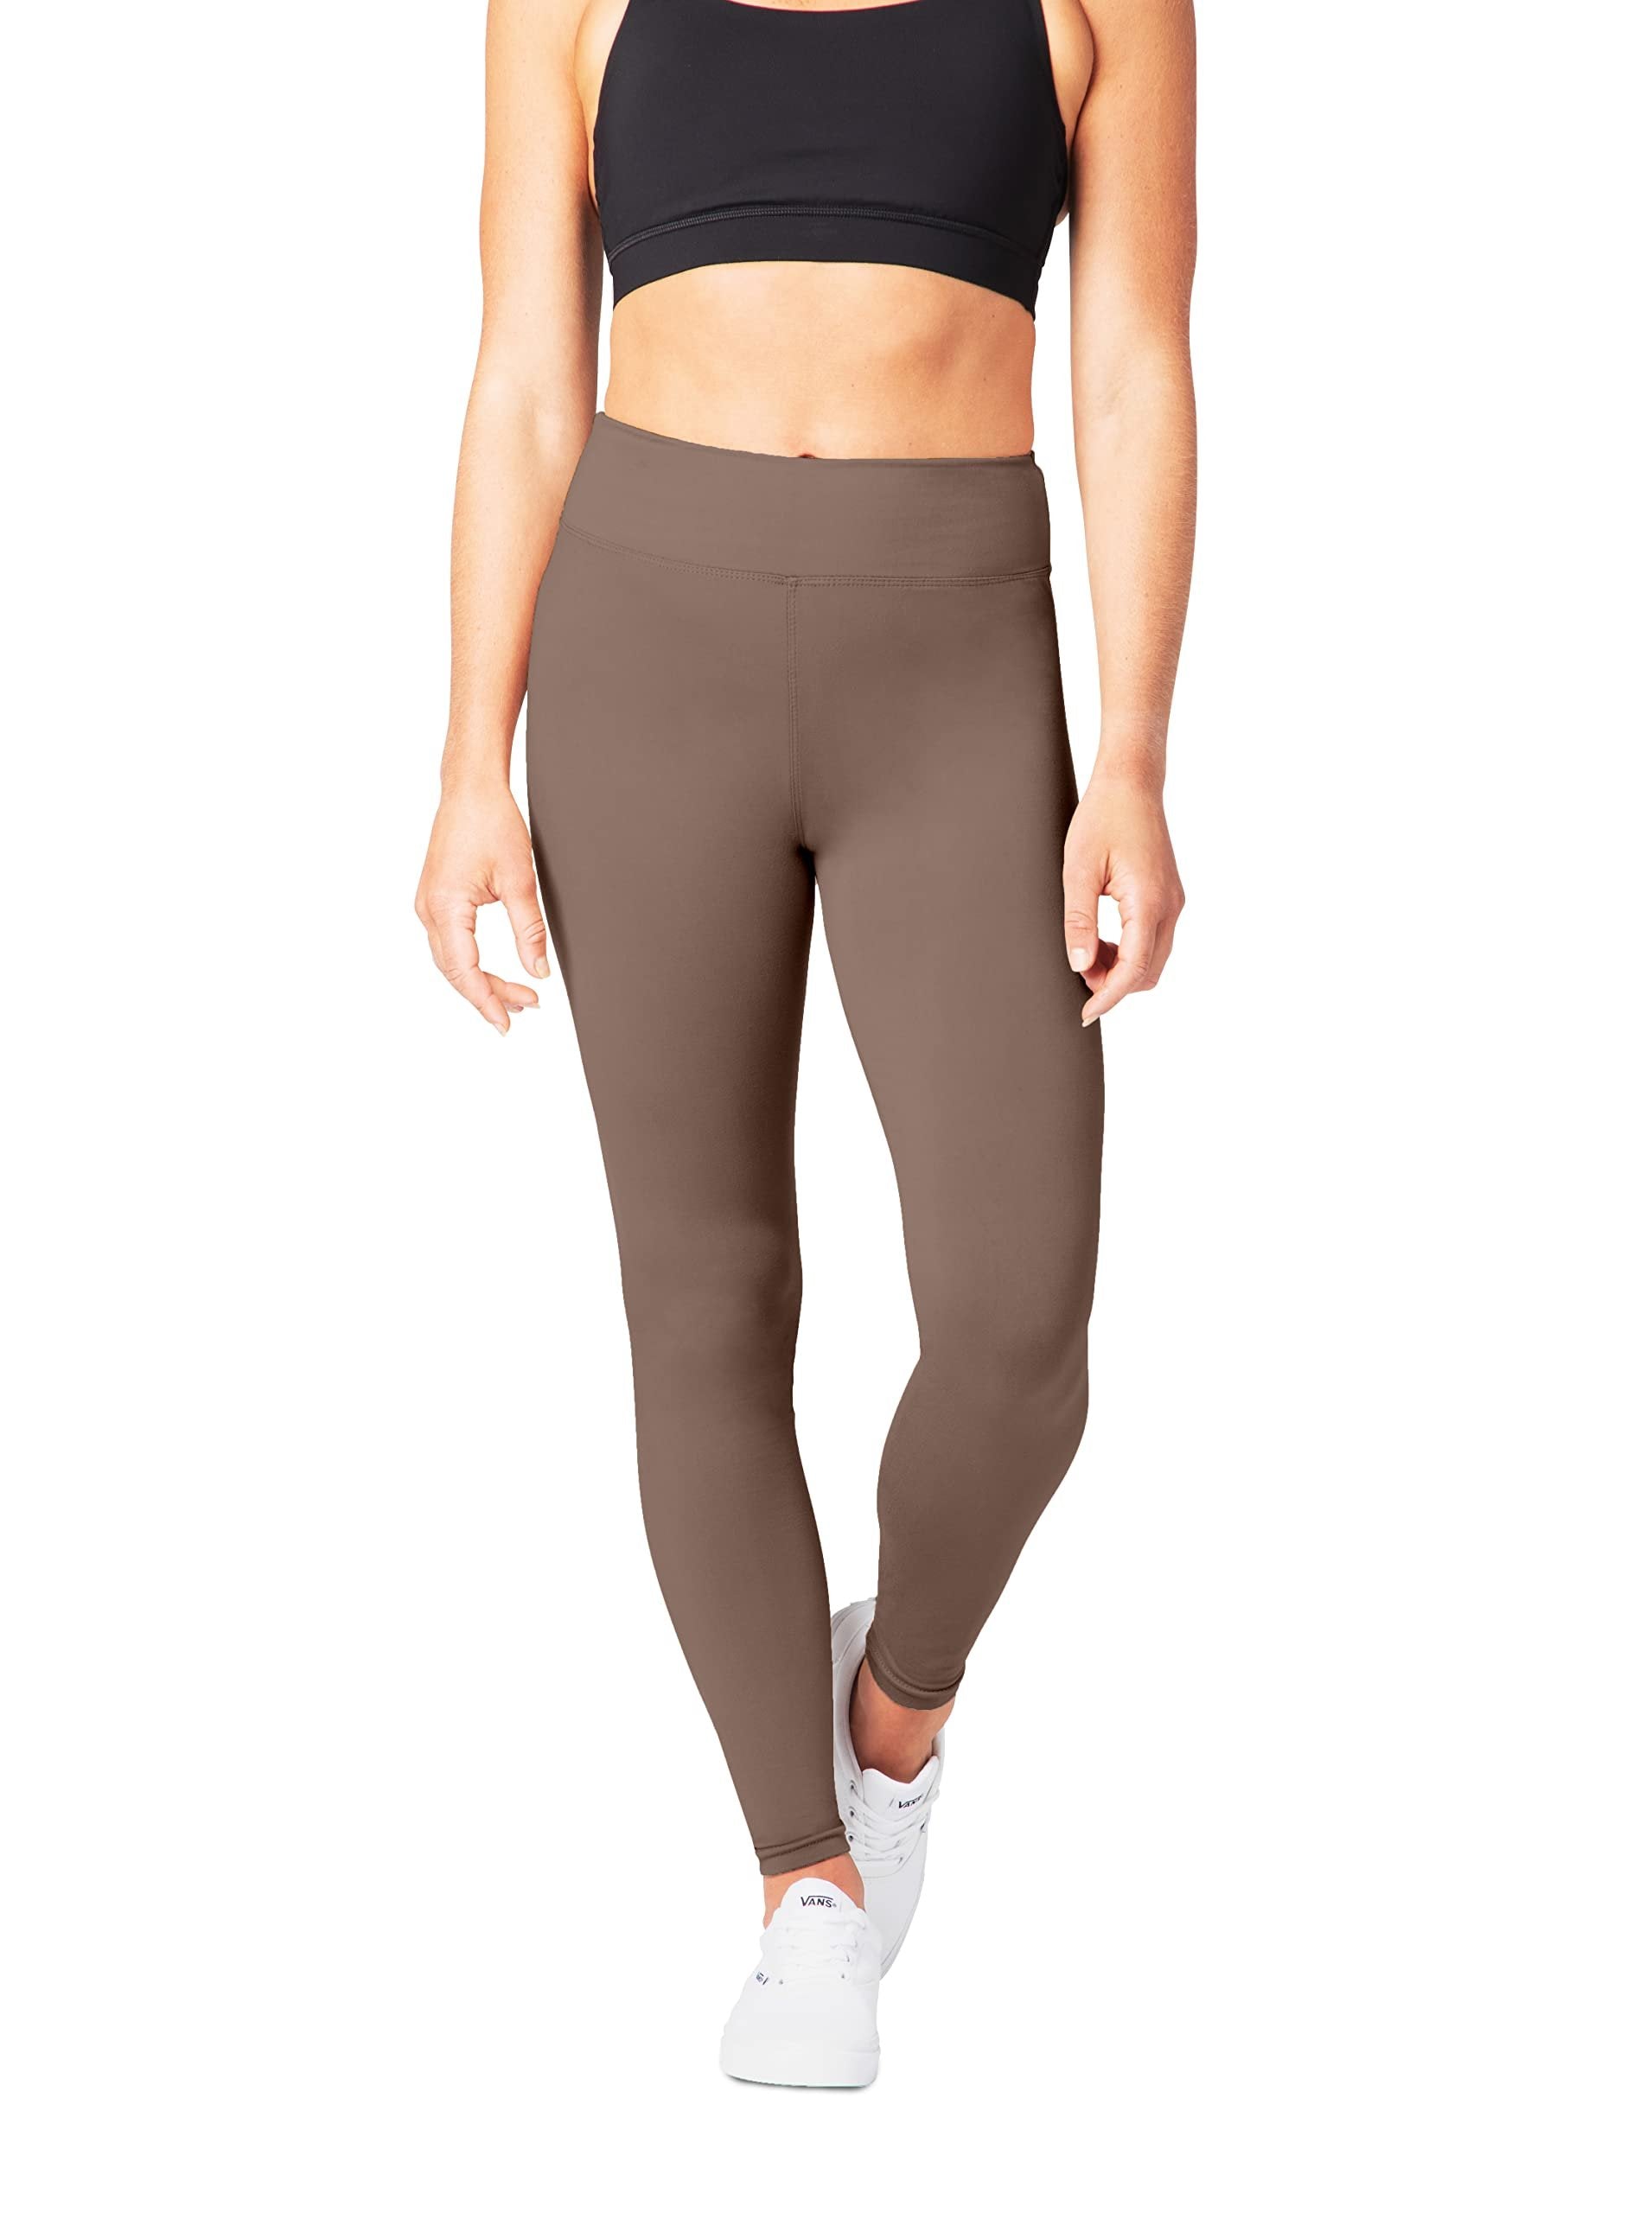 SATINA Tan High Waisted Yoga Leggings | Women's One Size Fits All | 3 Inch Waistband